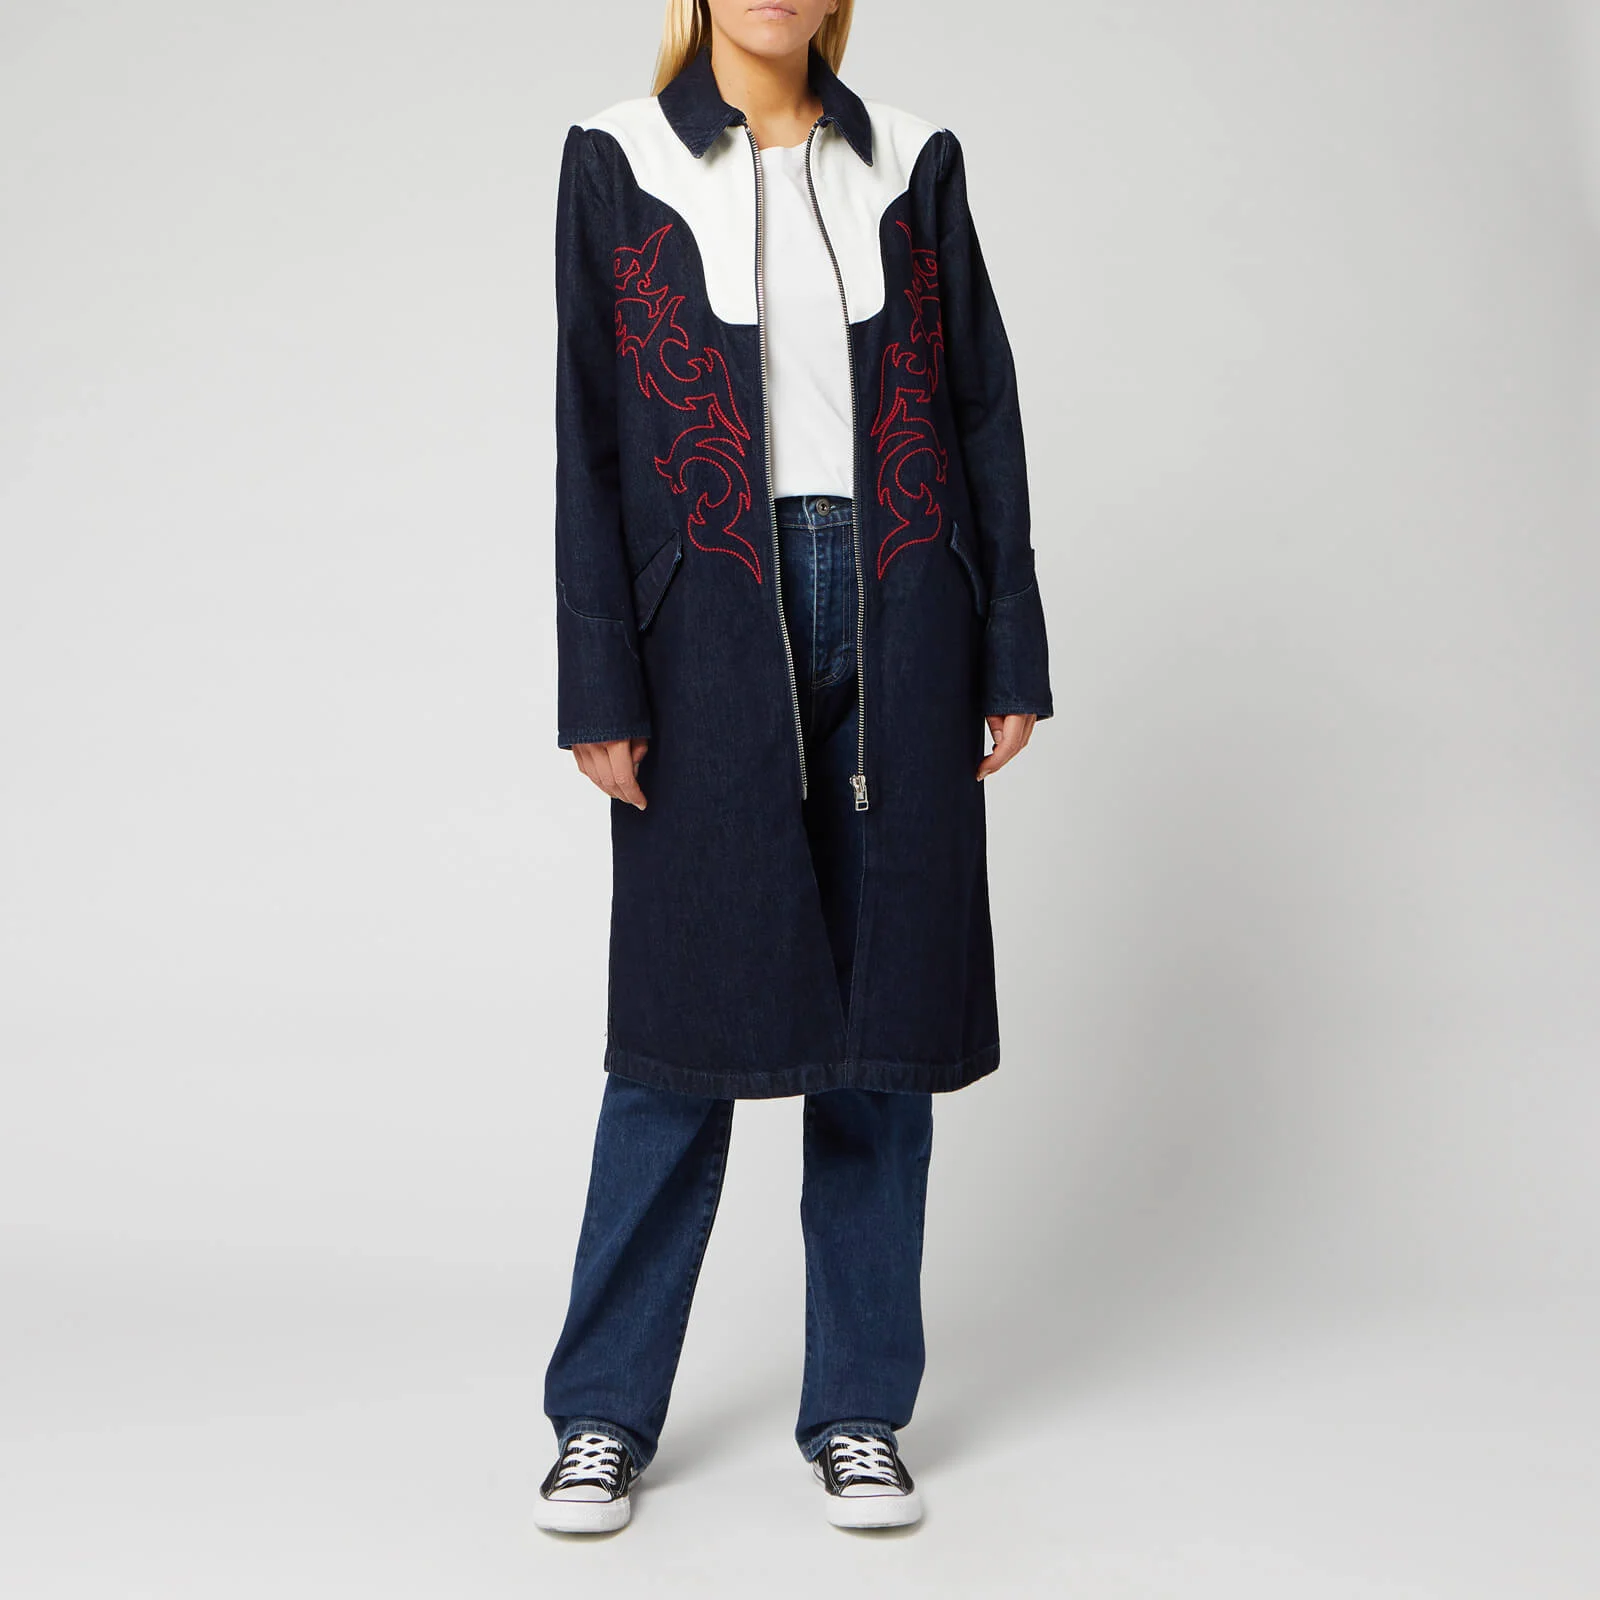 Levi's Women's Made and Crafted Empire Coat - Empire Blue Image 1